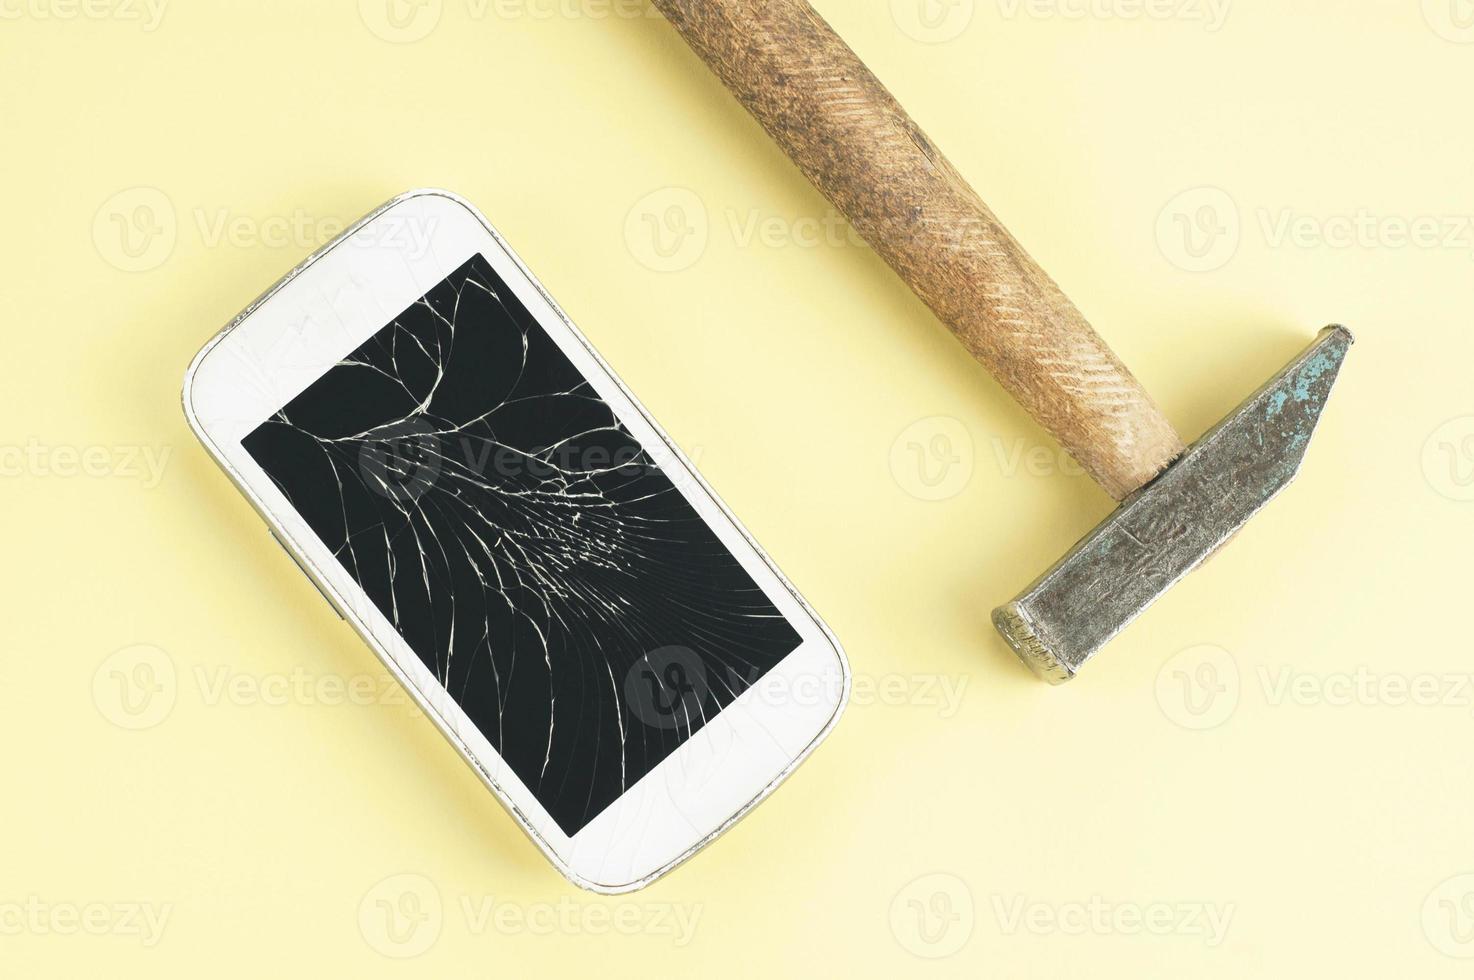 A cell phone with cracked screen and a hammer on brown background photo